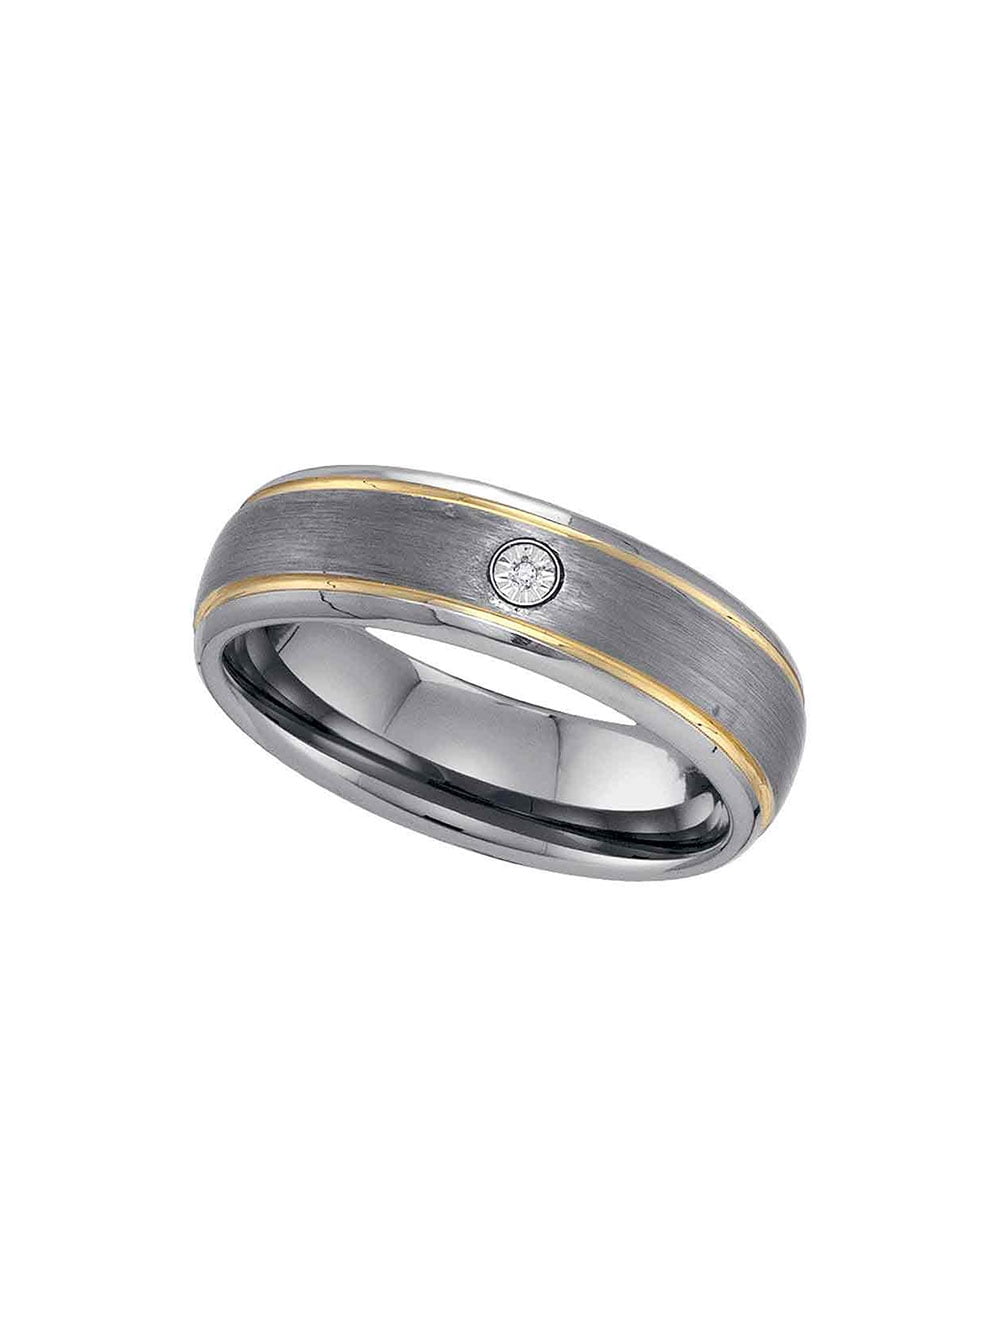 Golden Star Two-tone Tungsten Carbide Mens Round Diamond Band Ring .01 Cttw Size 14